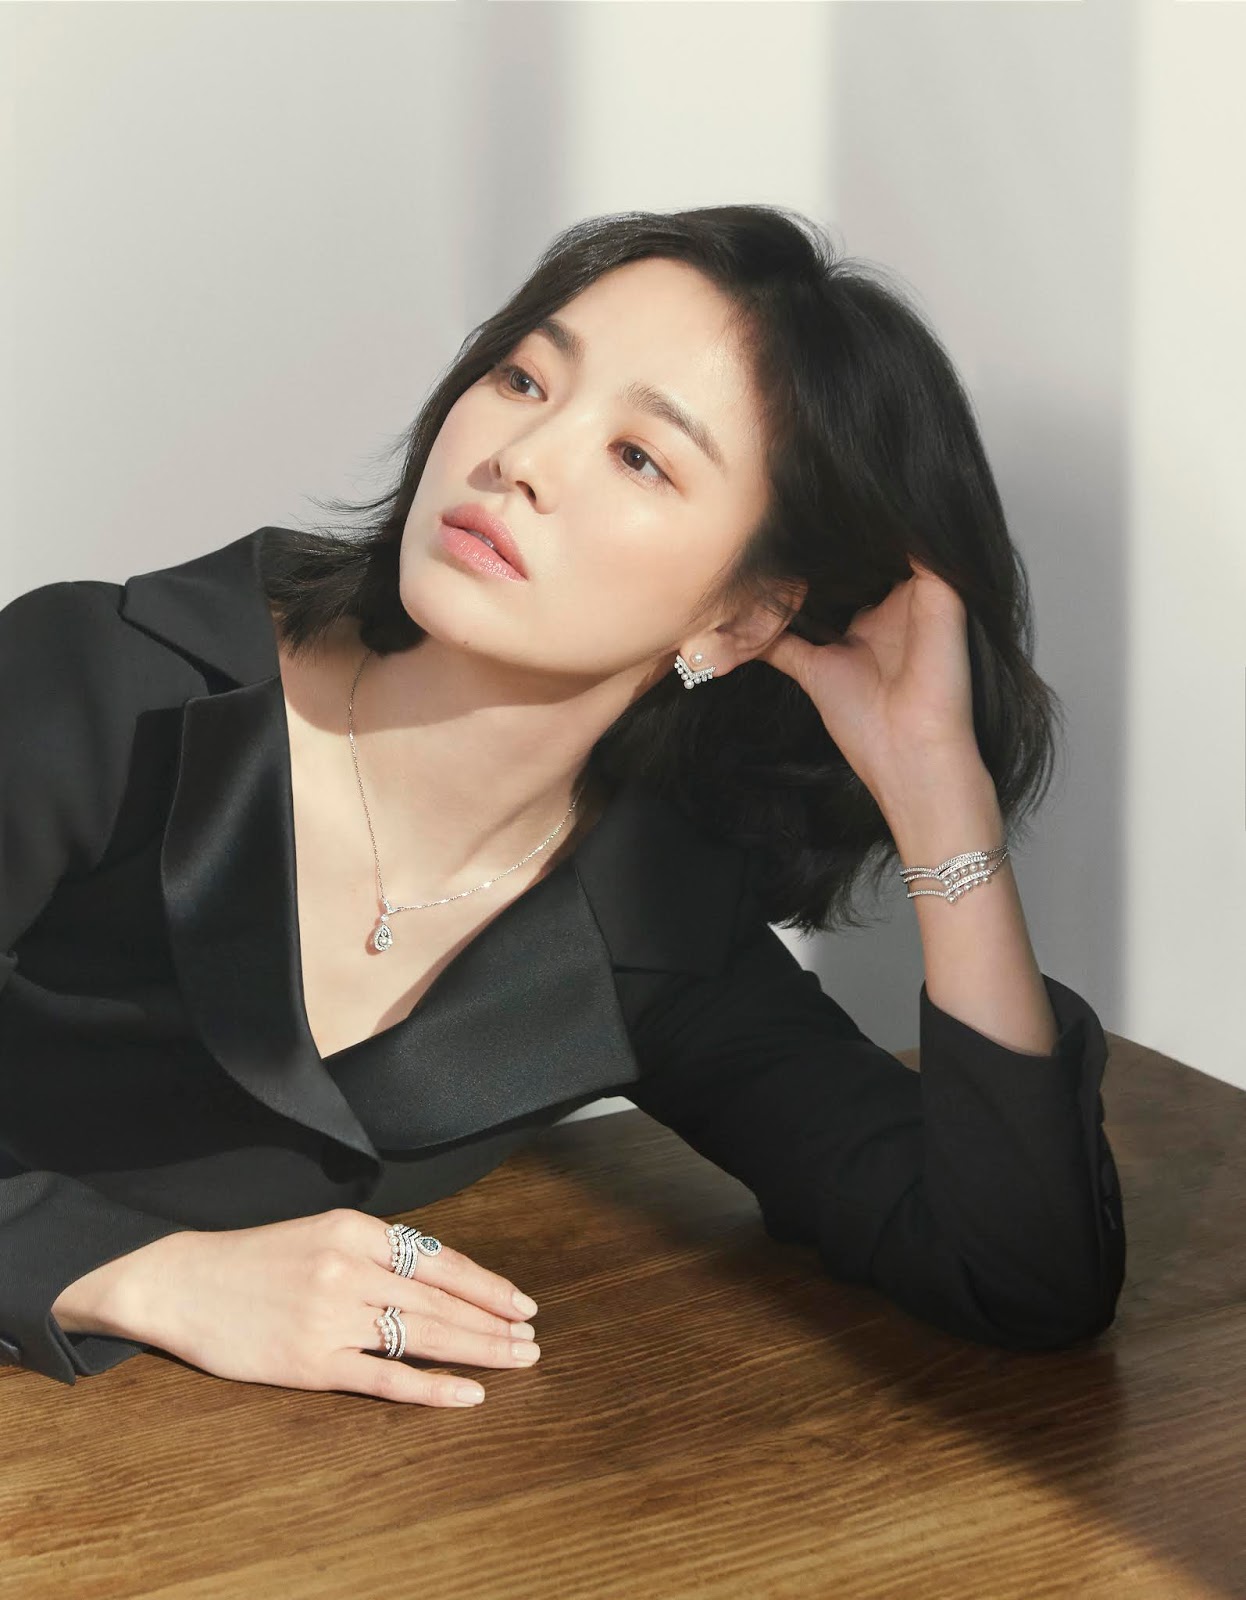 agencygarten: 2019 MARCH ELLE 'SONG HYE-KYO' HAIRSTYLING BY LEE HYE-YOUNG